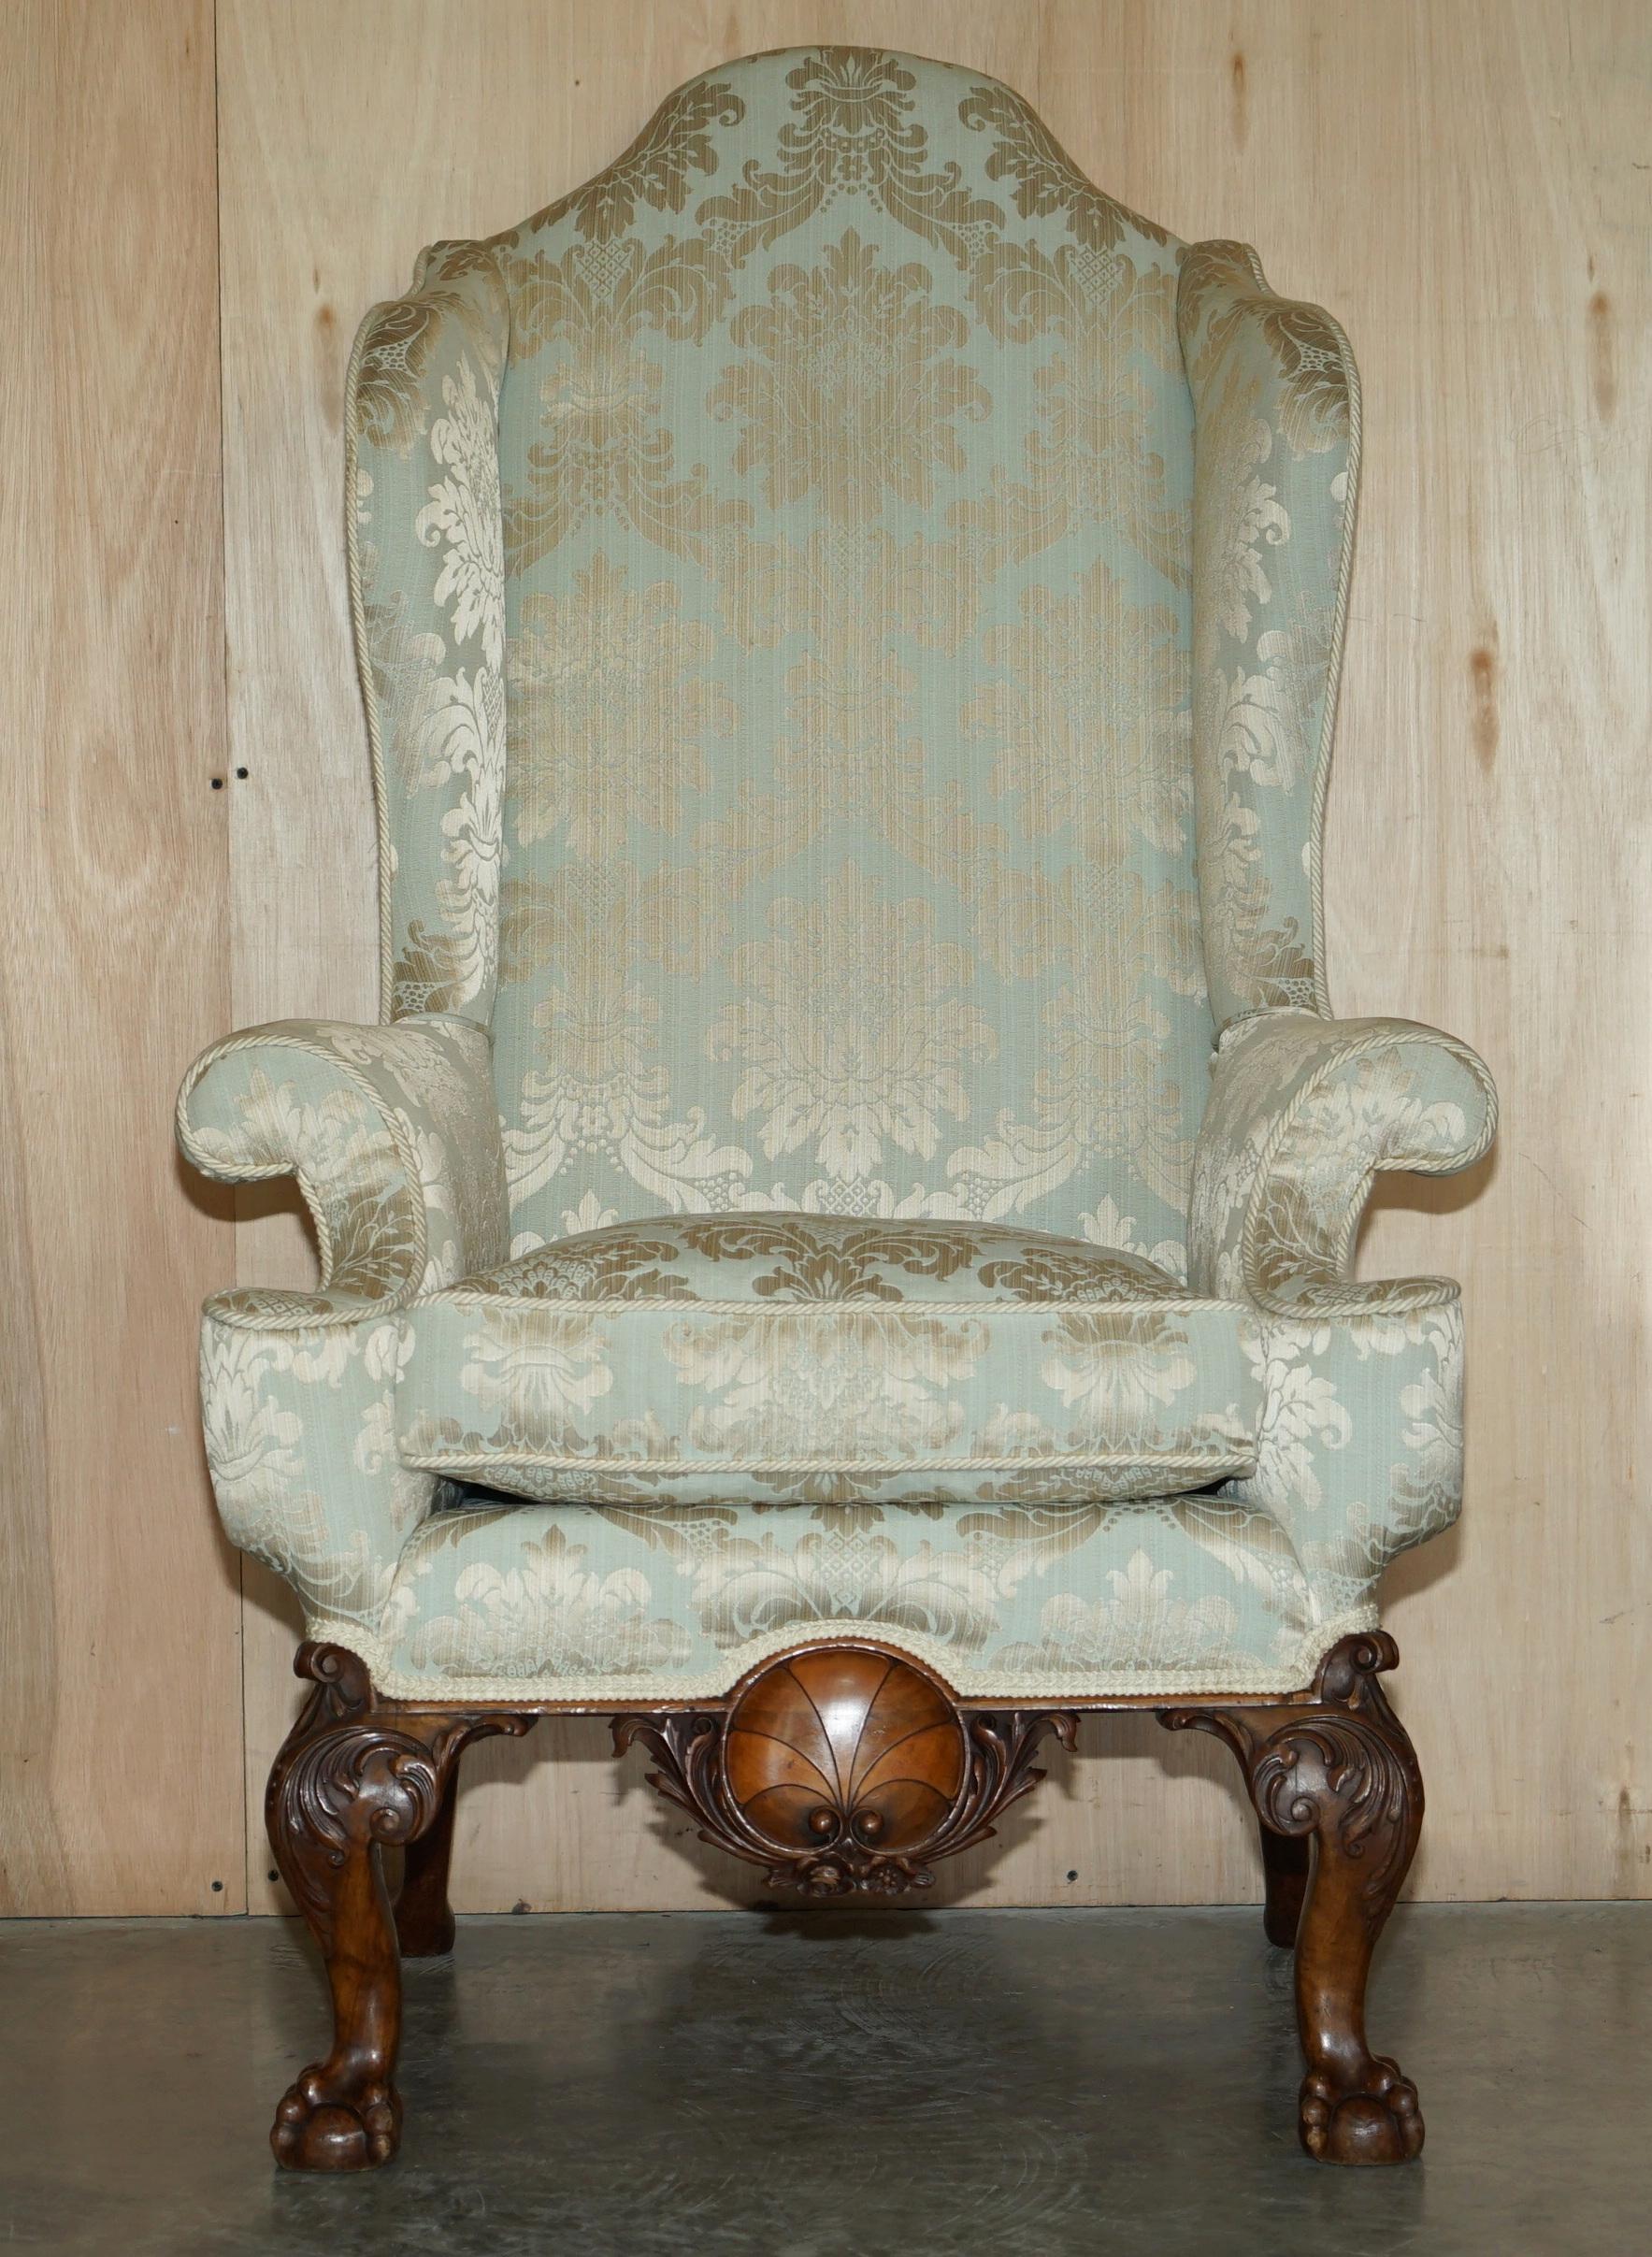 We are delighted to offer for sale this absolutely sublime, museum quality extra large Wingback armchair with ornately carved Claw & Ball legs

What a chair, you will never see another this size and quality again, the base is an absolute tour de